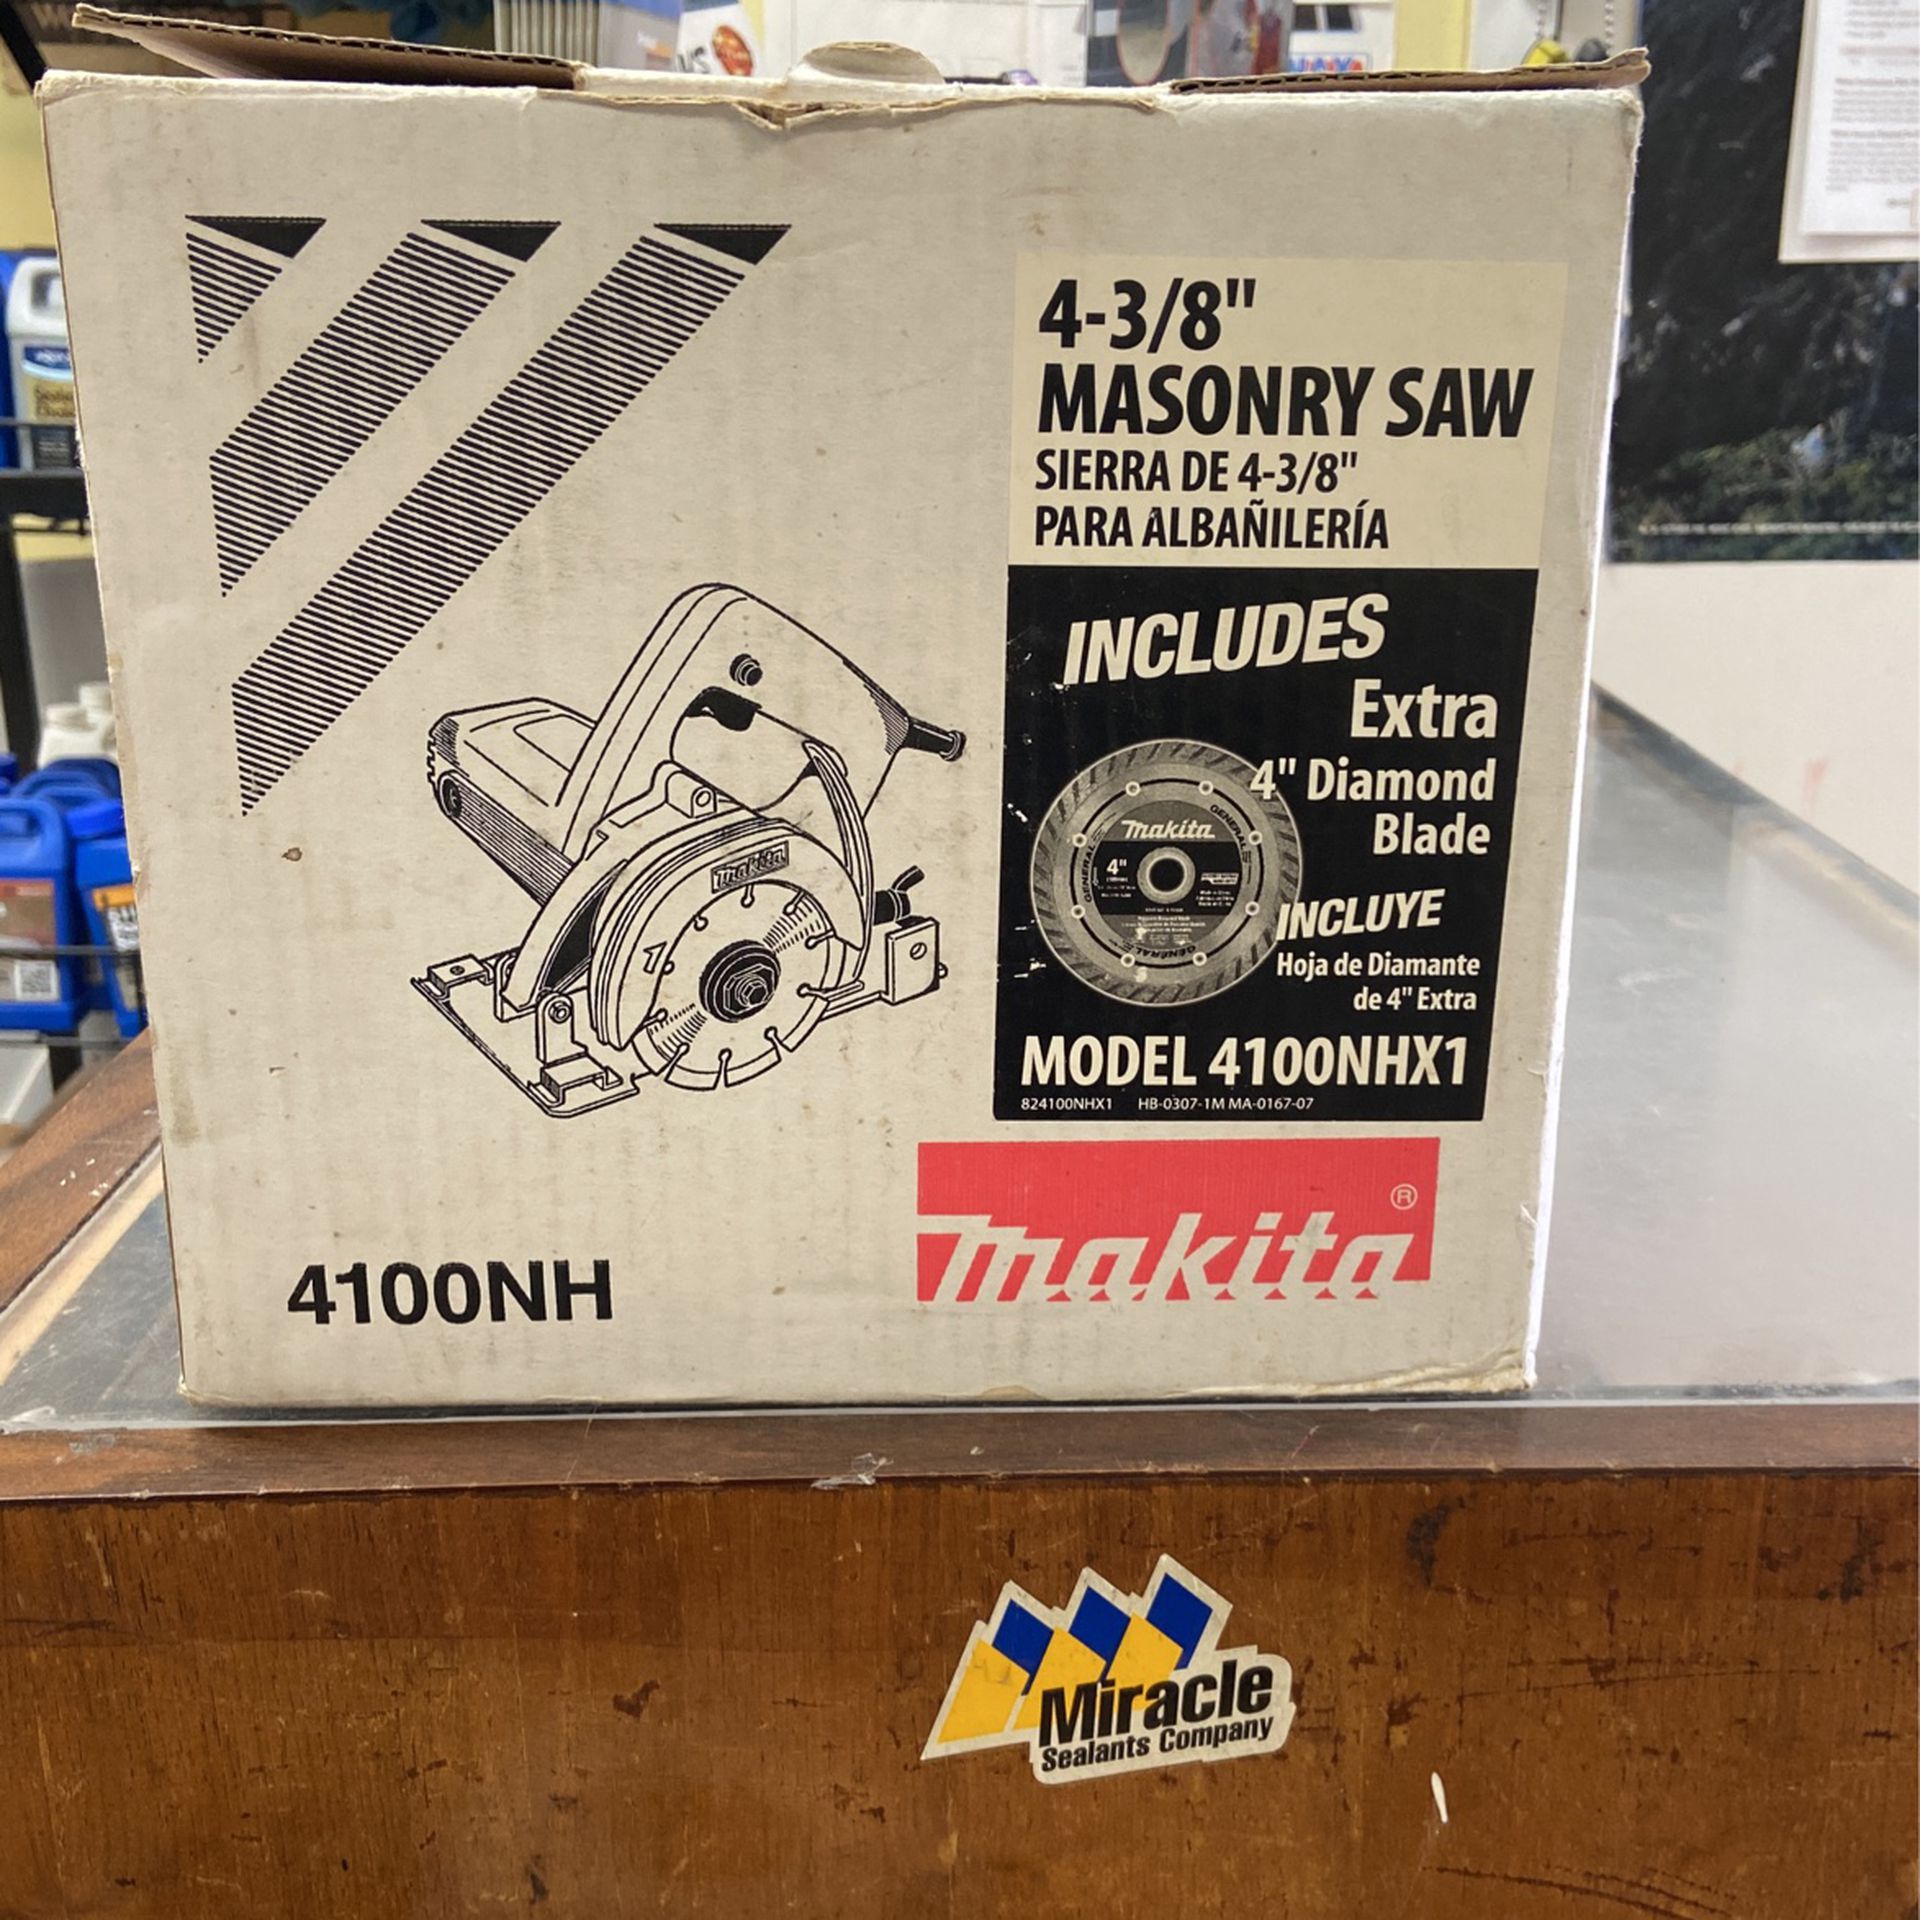 Makita 4100NH Masonry Saw for Sale in Merrick, NY OfferUp